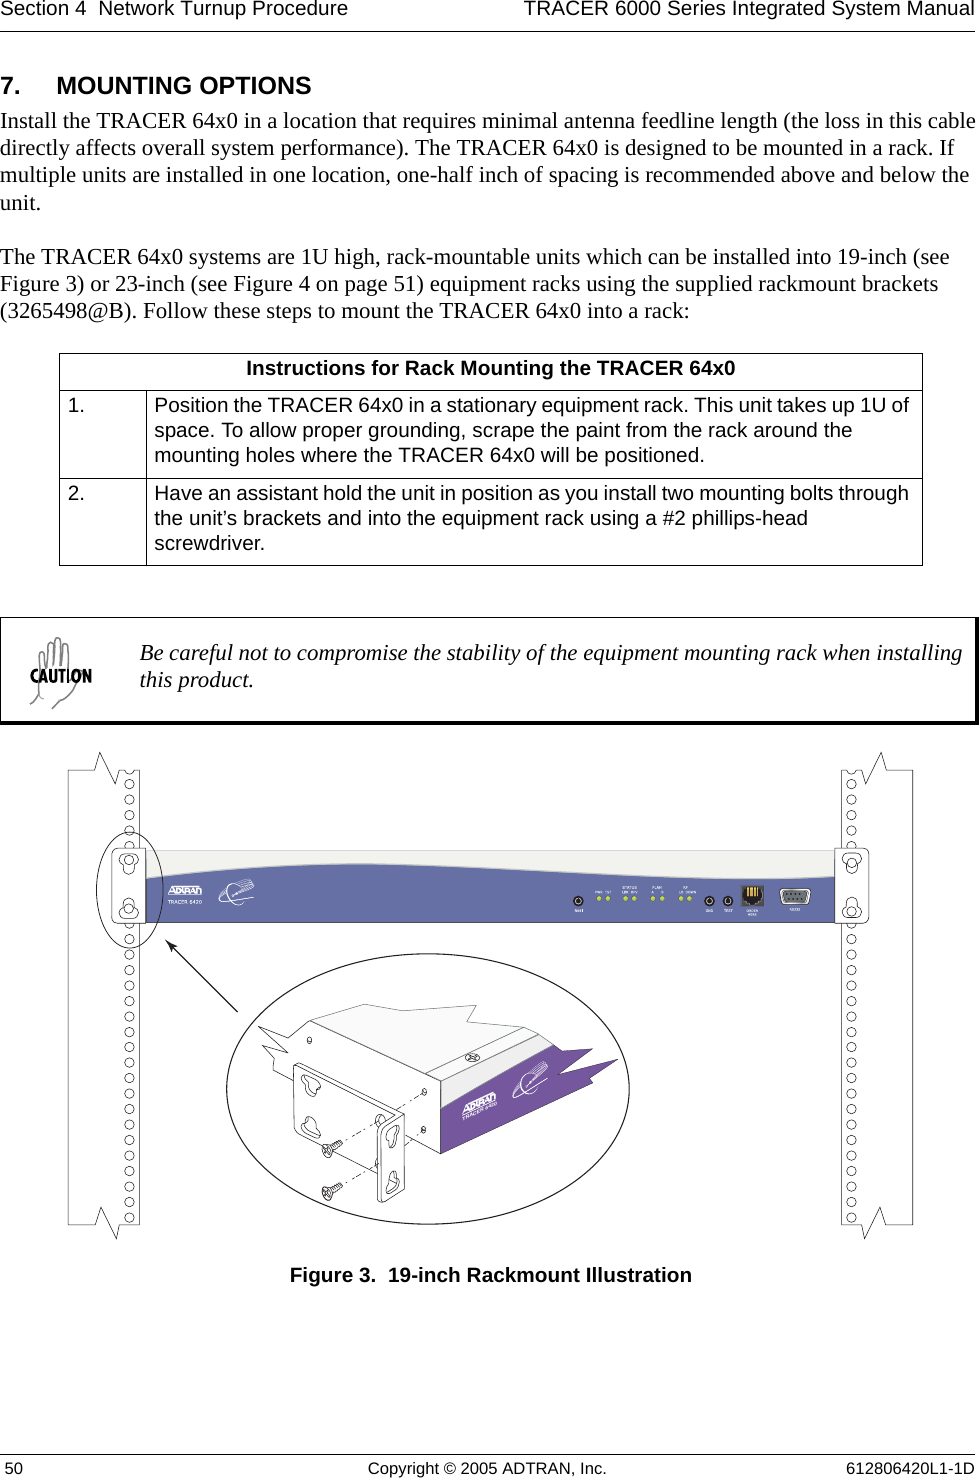 Section 4  Network Turnup Procedure TRACER 6000 Series Integrated System Manual 50 Copyright © 2005 ADTRAN, Inc. 612806420L1-1D7. MOUNTING OPTIONSInstall the TRACER 64x0 in a location that requires minimal antenna feedline length (the loss in this cable directly affects overall system performance). The TRACER 64x0 is designed to be mounted in a rack. If multiple units are installed in one location, one-half inch of spacing is recommended above and below the unit.The TRACER 64x0 systems are 1U high, rack-mountable units which can be installed into 19-inch (see Figure 3) or 23-inch (see Figure 4 on page 51) equipment racks using the supplied rackmount brackets (3265498@B). Follow these steps to mount the TRACER 64x0 into a rack:Figure 3.  19-inch Rackmount IllustrationInstructions for Rack Mounting the TRACER 64x01. Position the TRACER 64x0 in a stationary equipment rack. This unit takes up 1U of space. To allow proper grounding, scrape the paint from the rack around the mounting holes where the TRACER 64x0 will be positioned.2. Have an assistant hold the unit in position as you install two mounting bolts through the unit’s brackets and into the equipment rack using a #2 phillips-head screwdriver.Be careful not to compromise the stability of the equipment mounting rack when installing this product.TRACER 6420